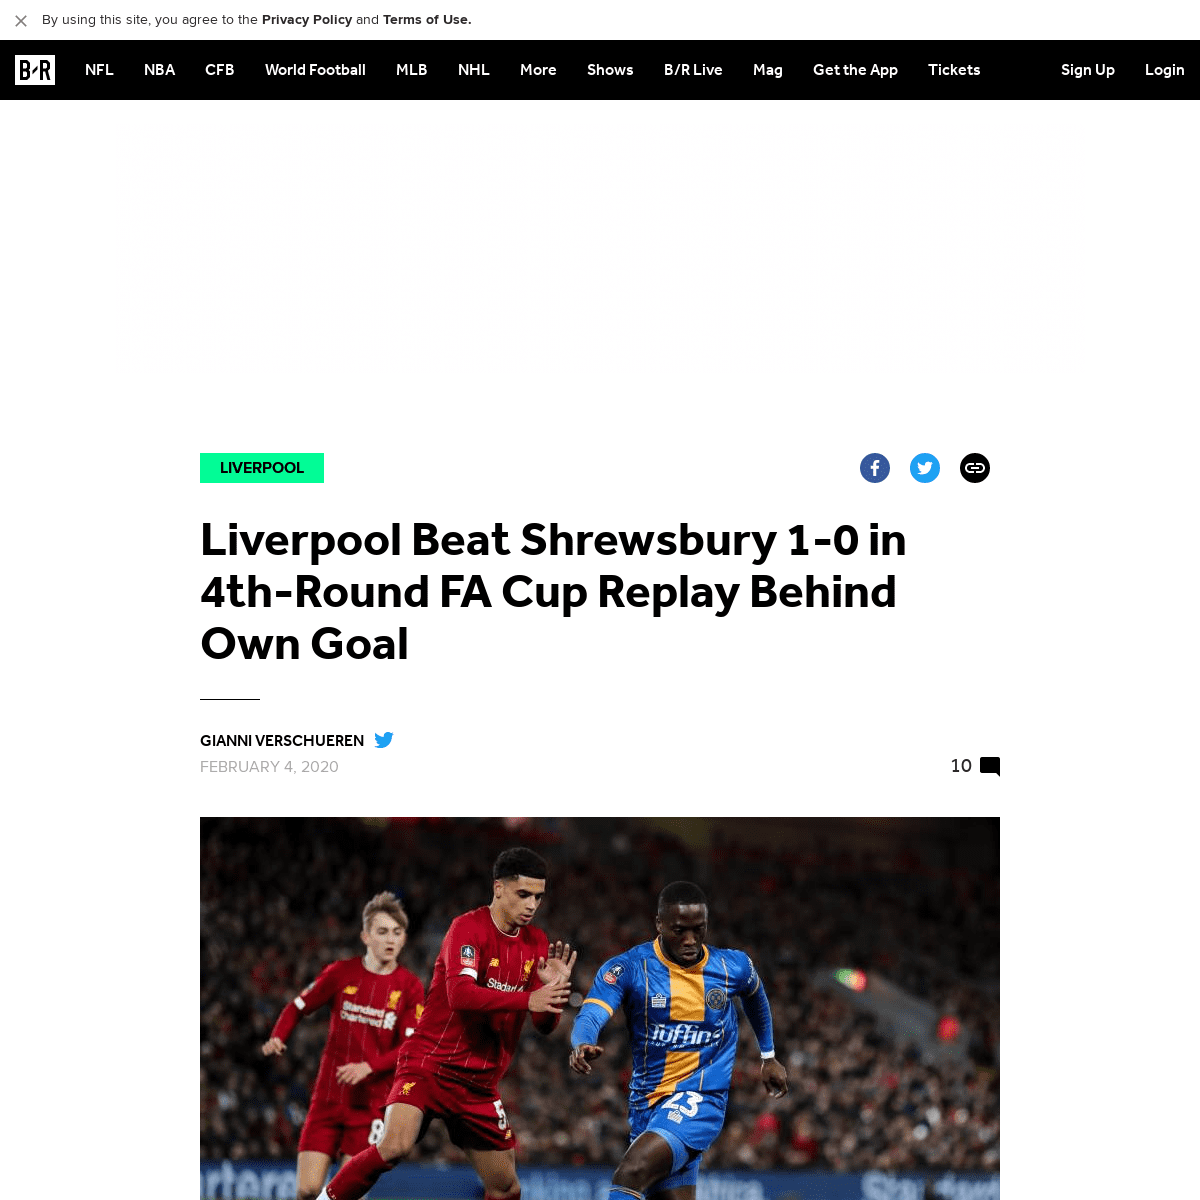 A complete backup of bleacherreport.com/articles/2874747-liverpool-beat-shrewsbury-1-0-in-4th-round-fa-cup-replay-behind-own-goa